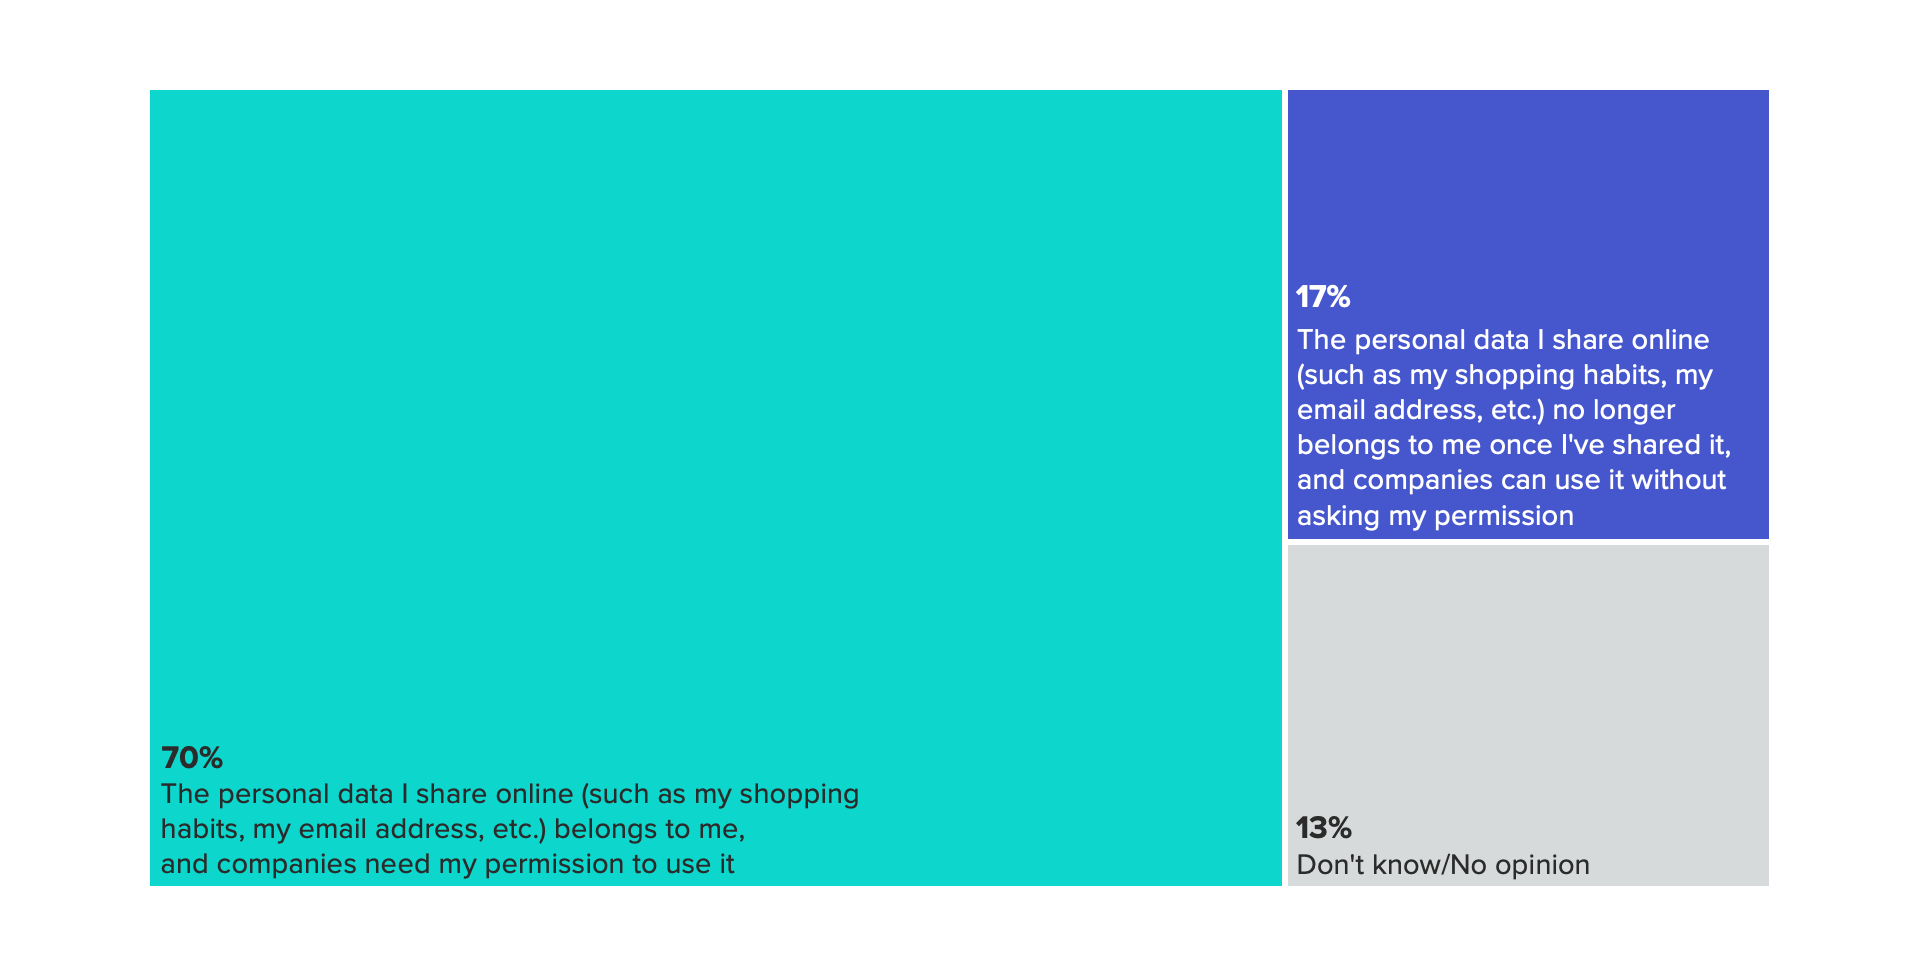 Bar chart of adults' opinions on data privacy, showing most people believe the personal data they share online belongs to them and companies need their permission to use.